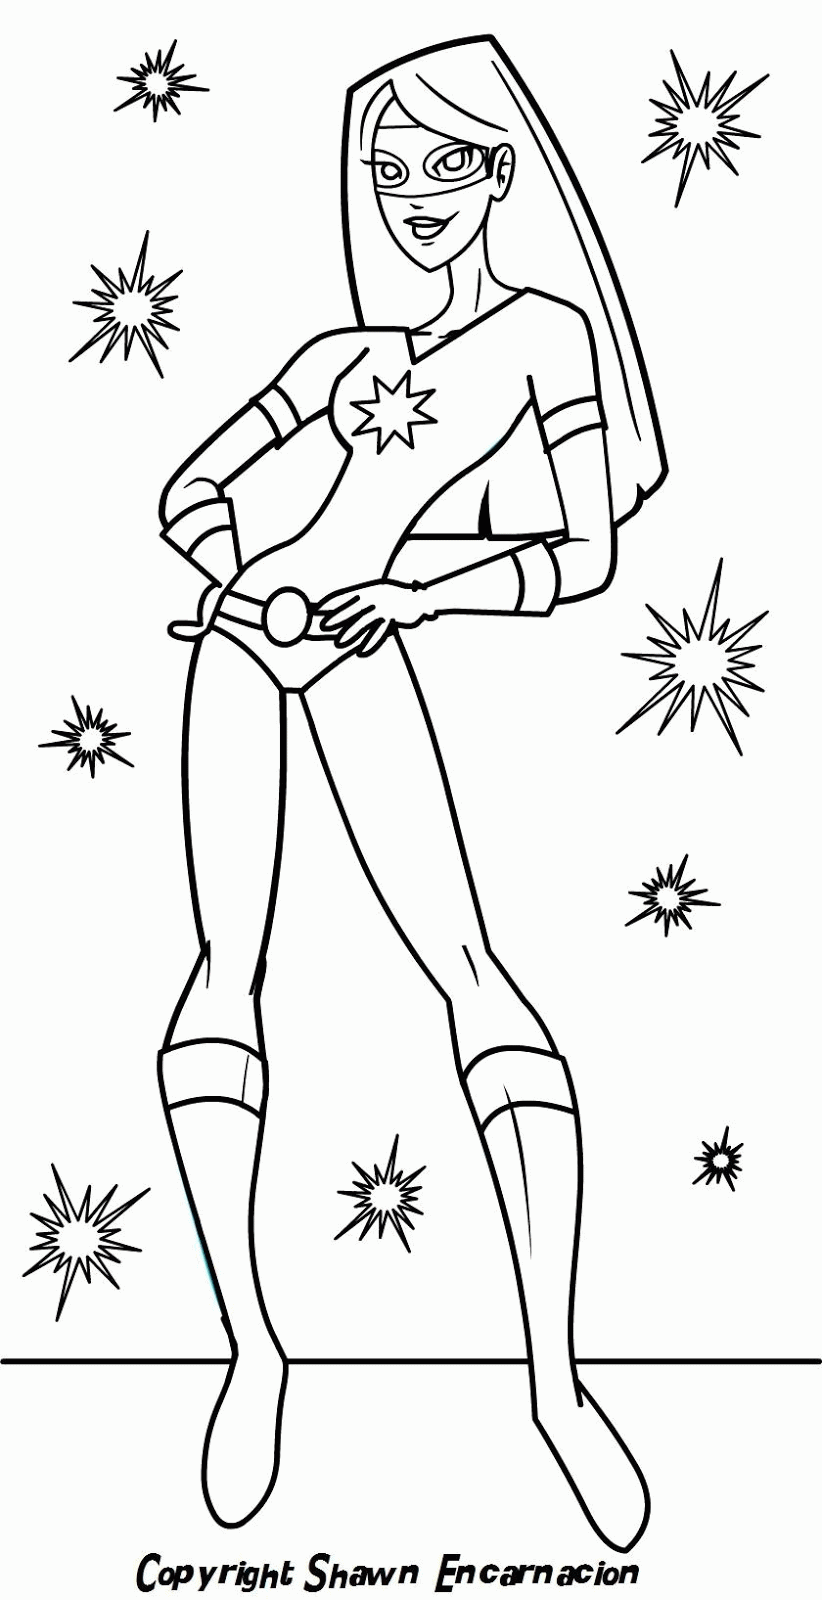  Super Hero Printable Coloring Pages - Super Hero Squad